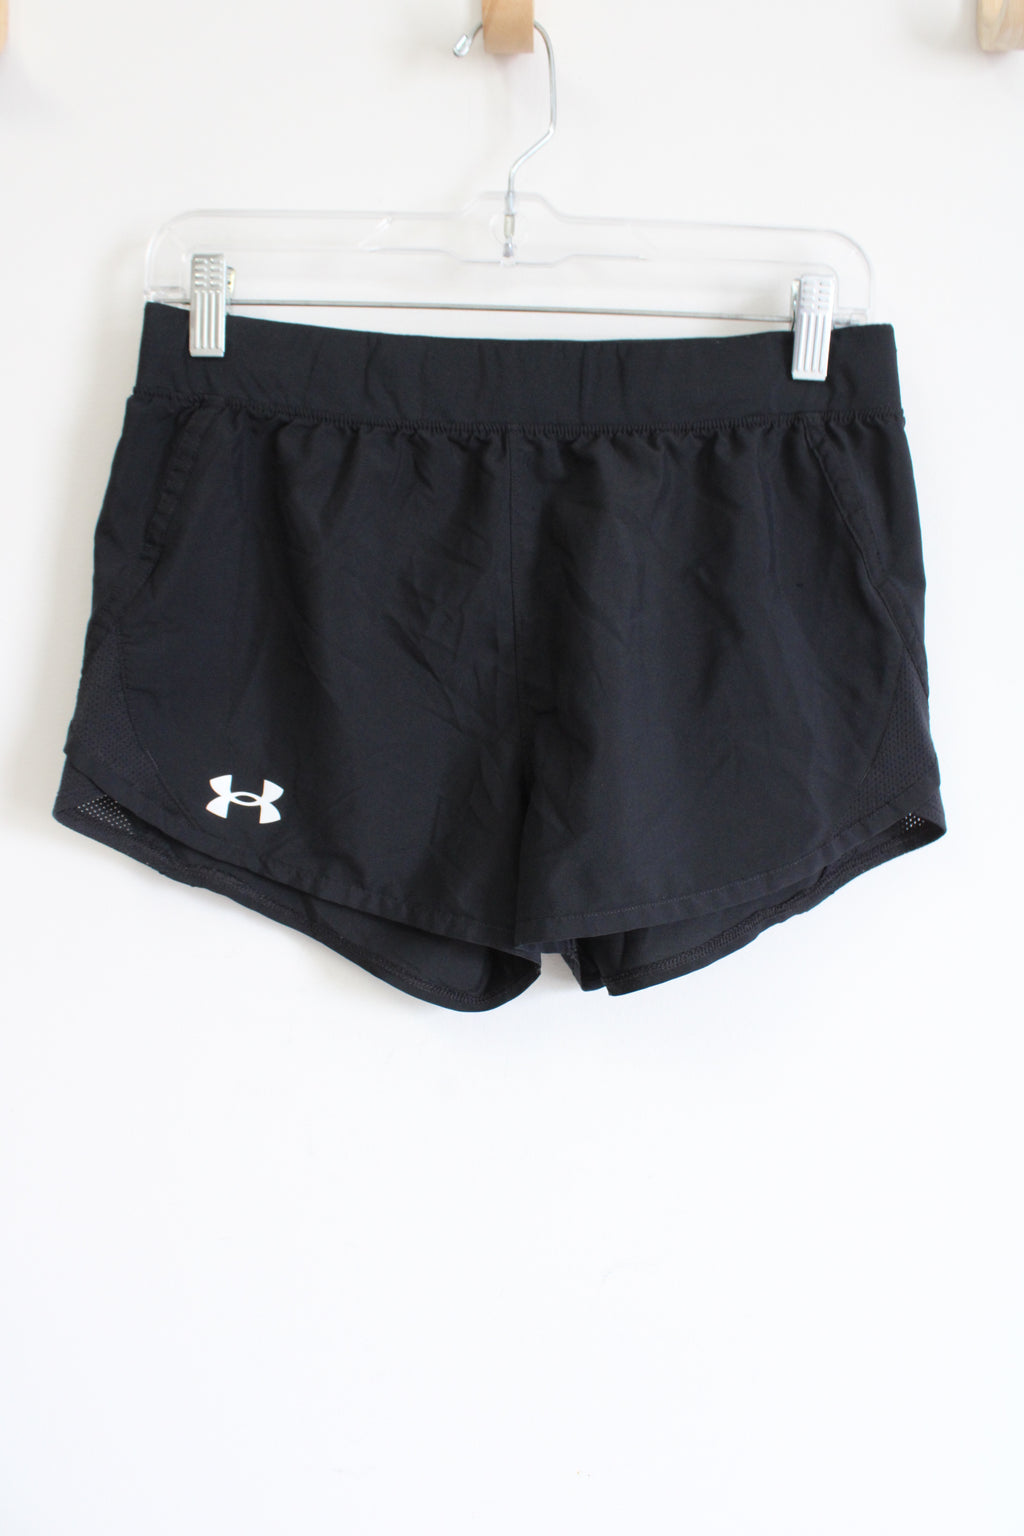 Under Armour Black Athletic Shorts | S